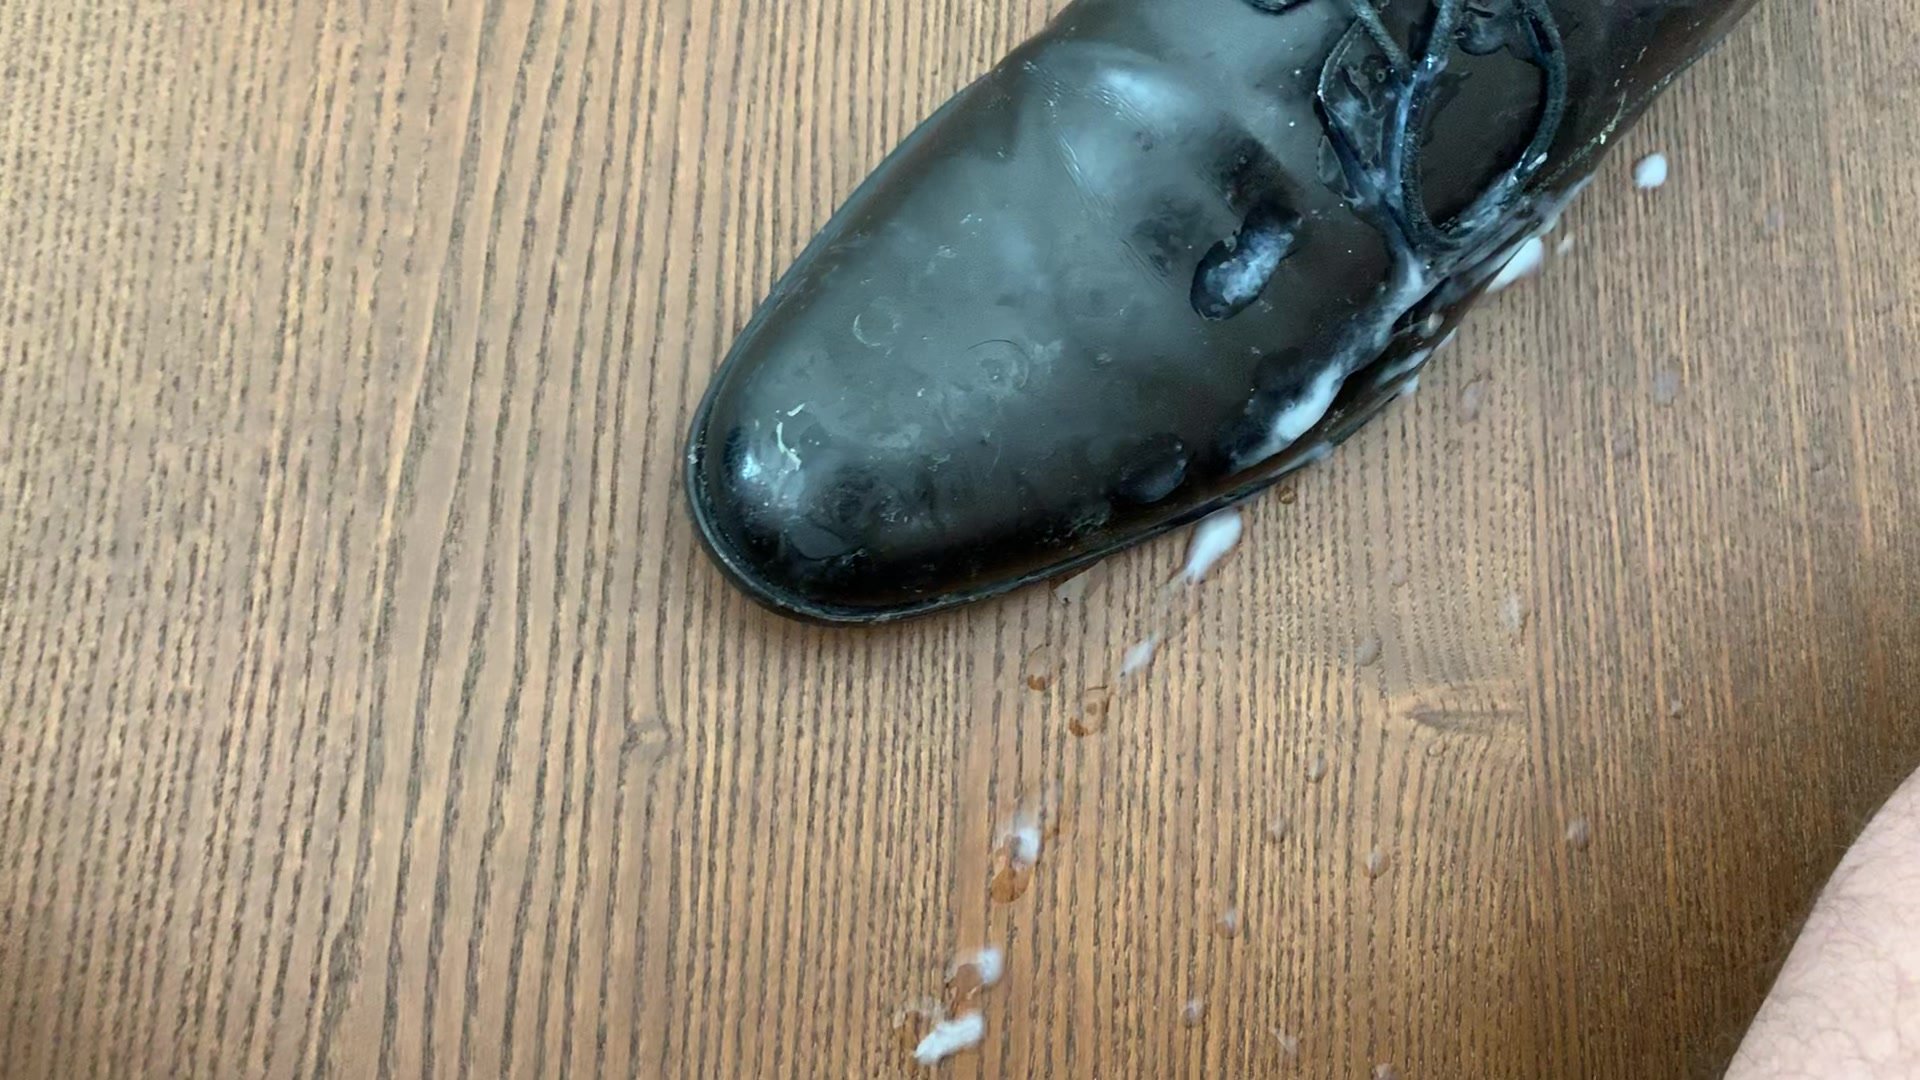 Heavy cum on shoes